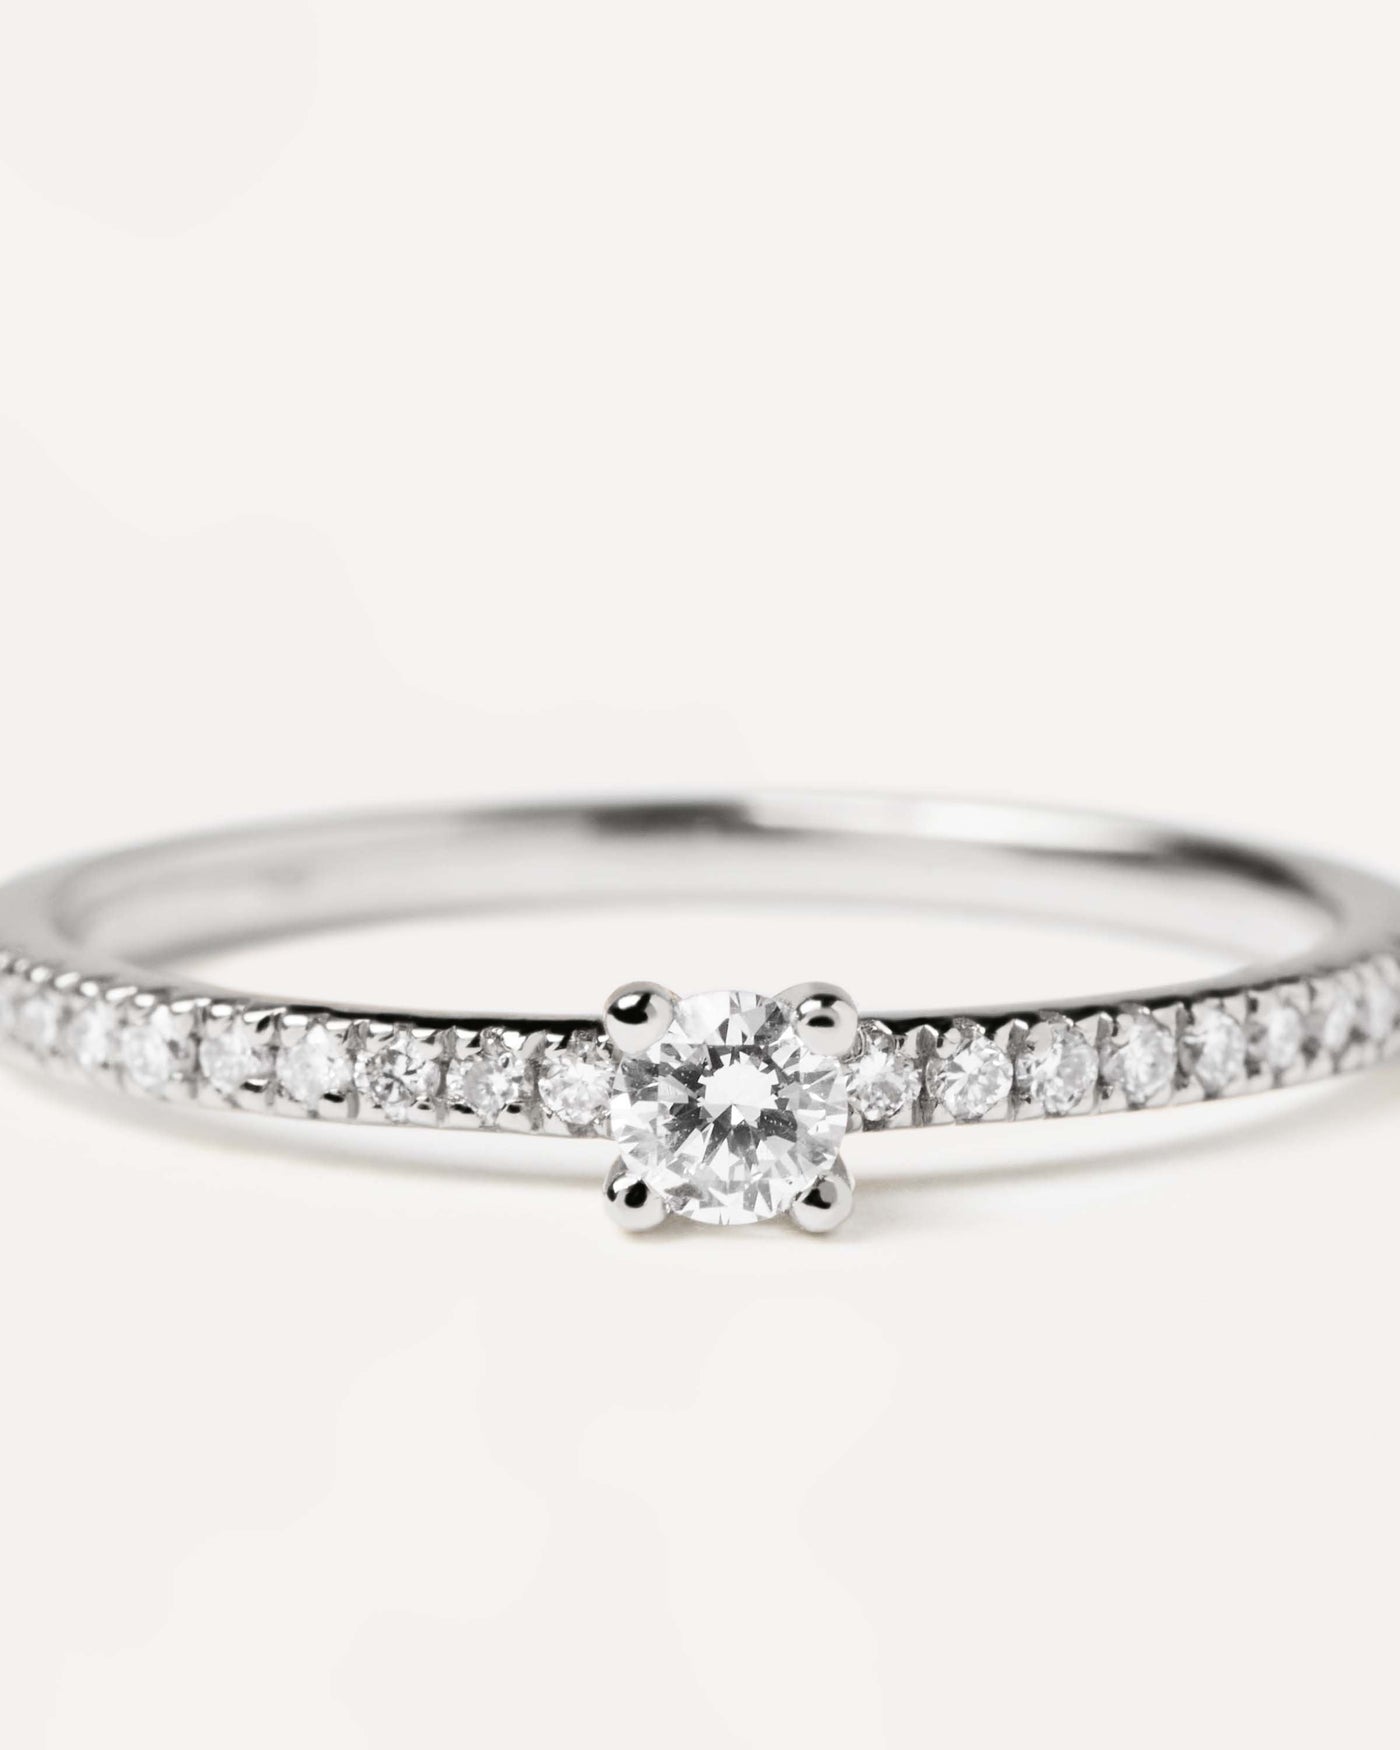 2023 Selection | Diamonds and White Gold Solstice Ring. Solid white gold ring with diamond eternity band and a round cut center diamond, making 0.31K. Get the latest arrival from PDPAOLA. Place your order safely and get this Best Seller. Free Shipping.